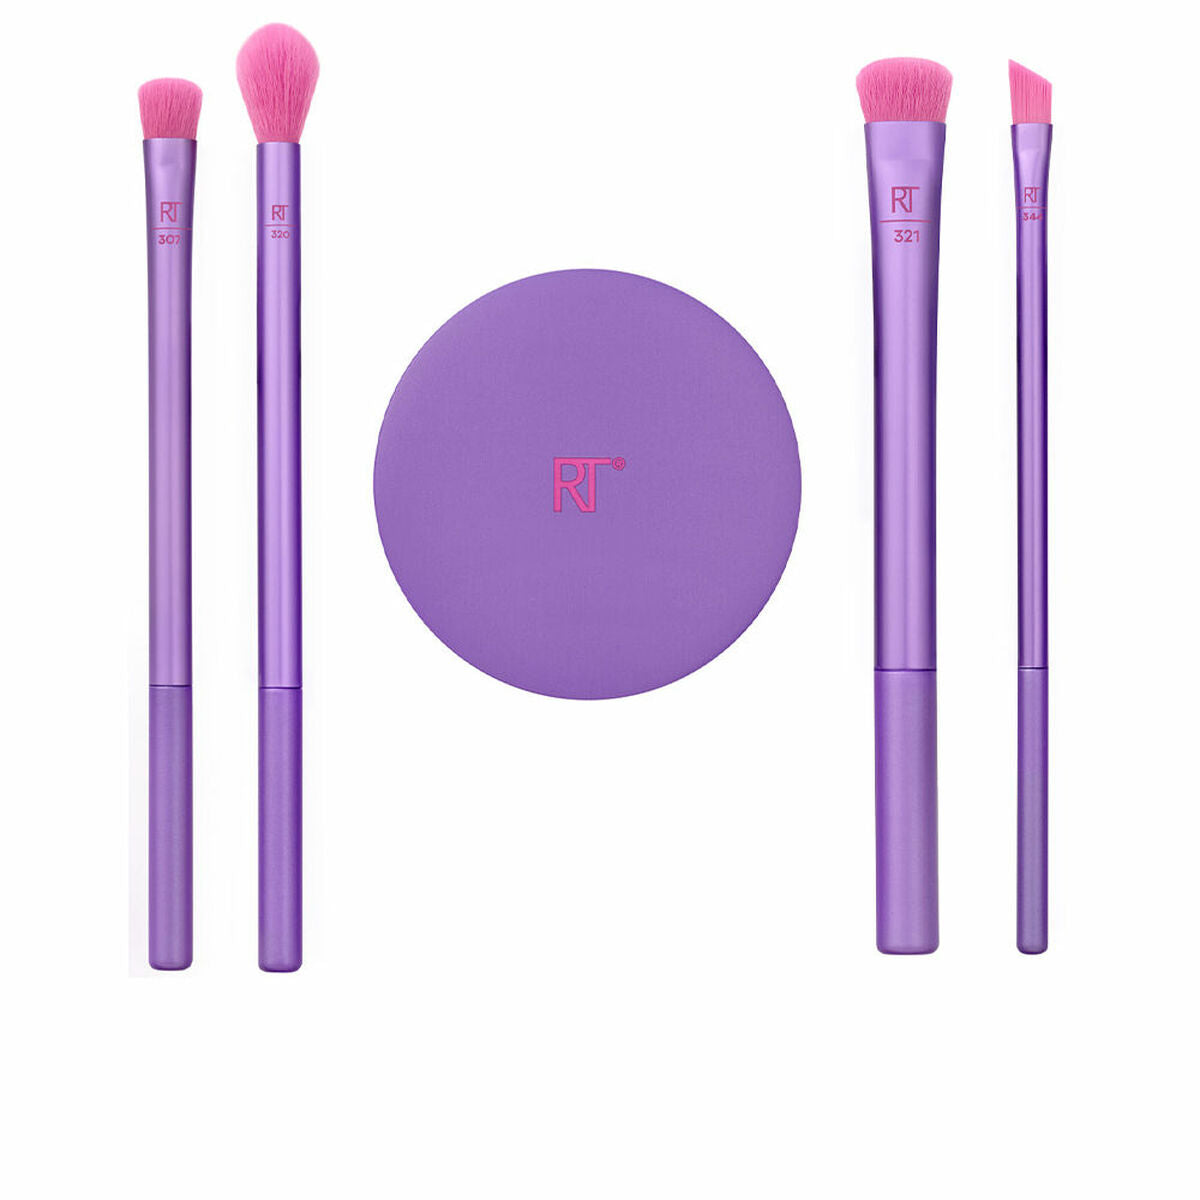 Set of Make-up Brushes Real Techniques Brow Styling Fuchsia 5 Pieces